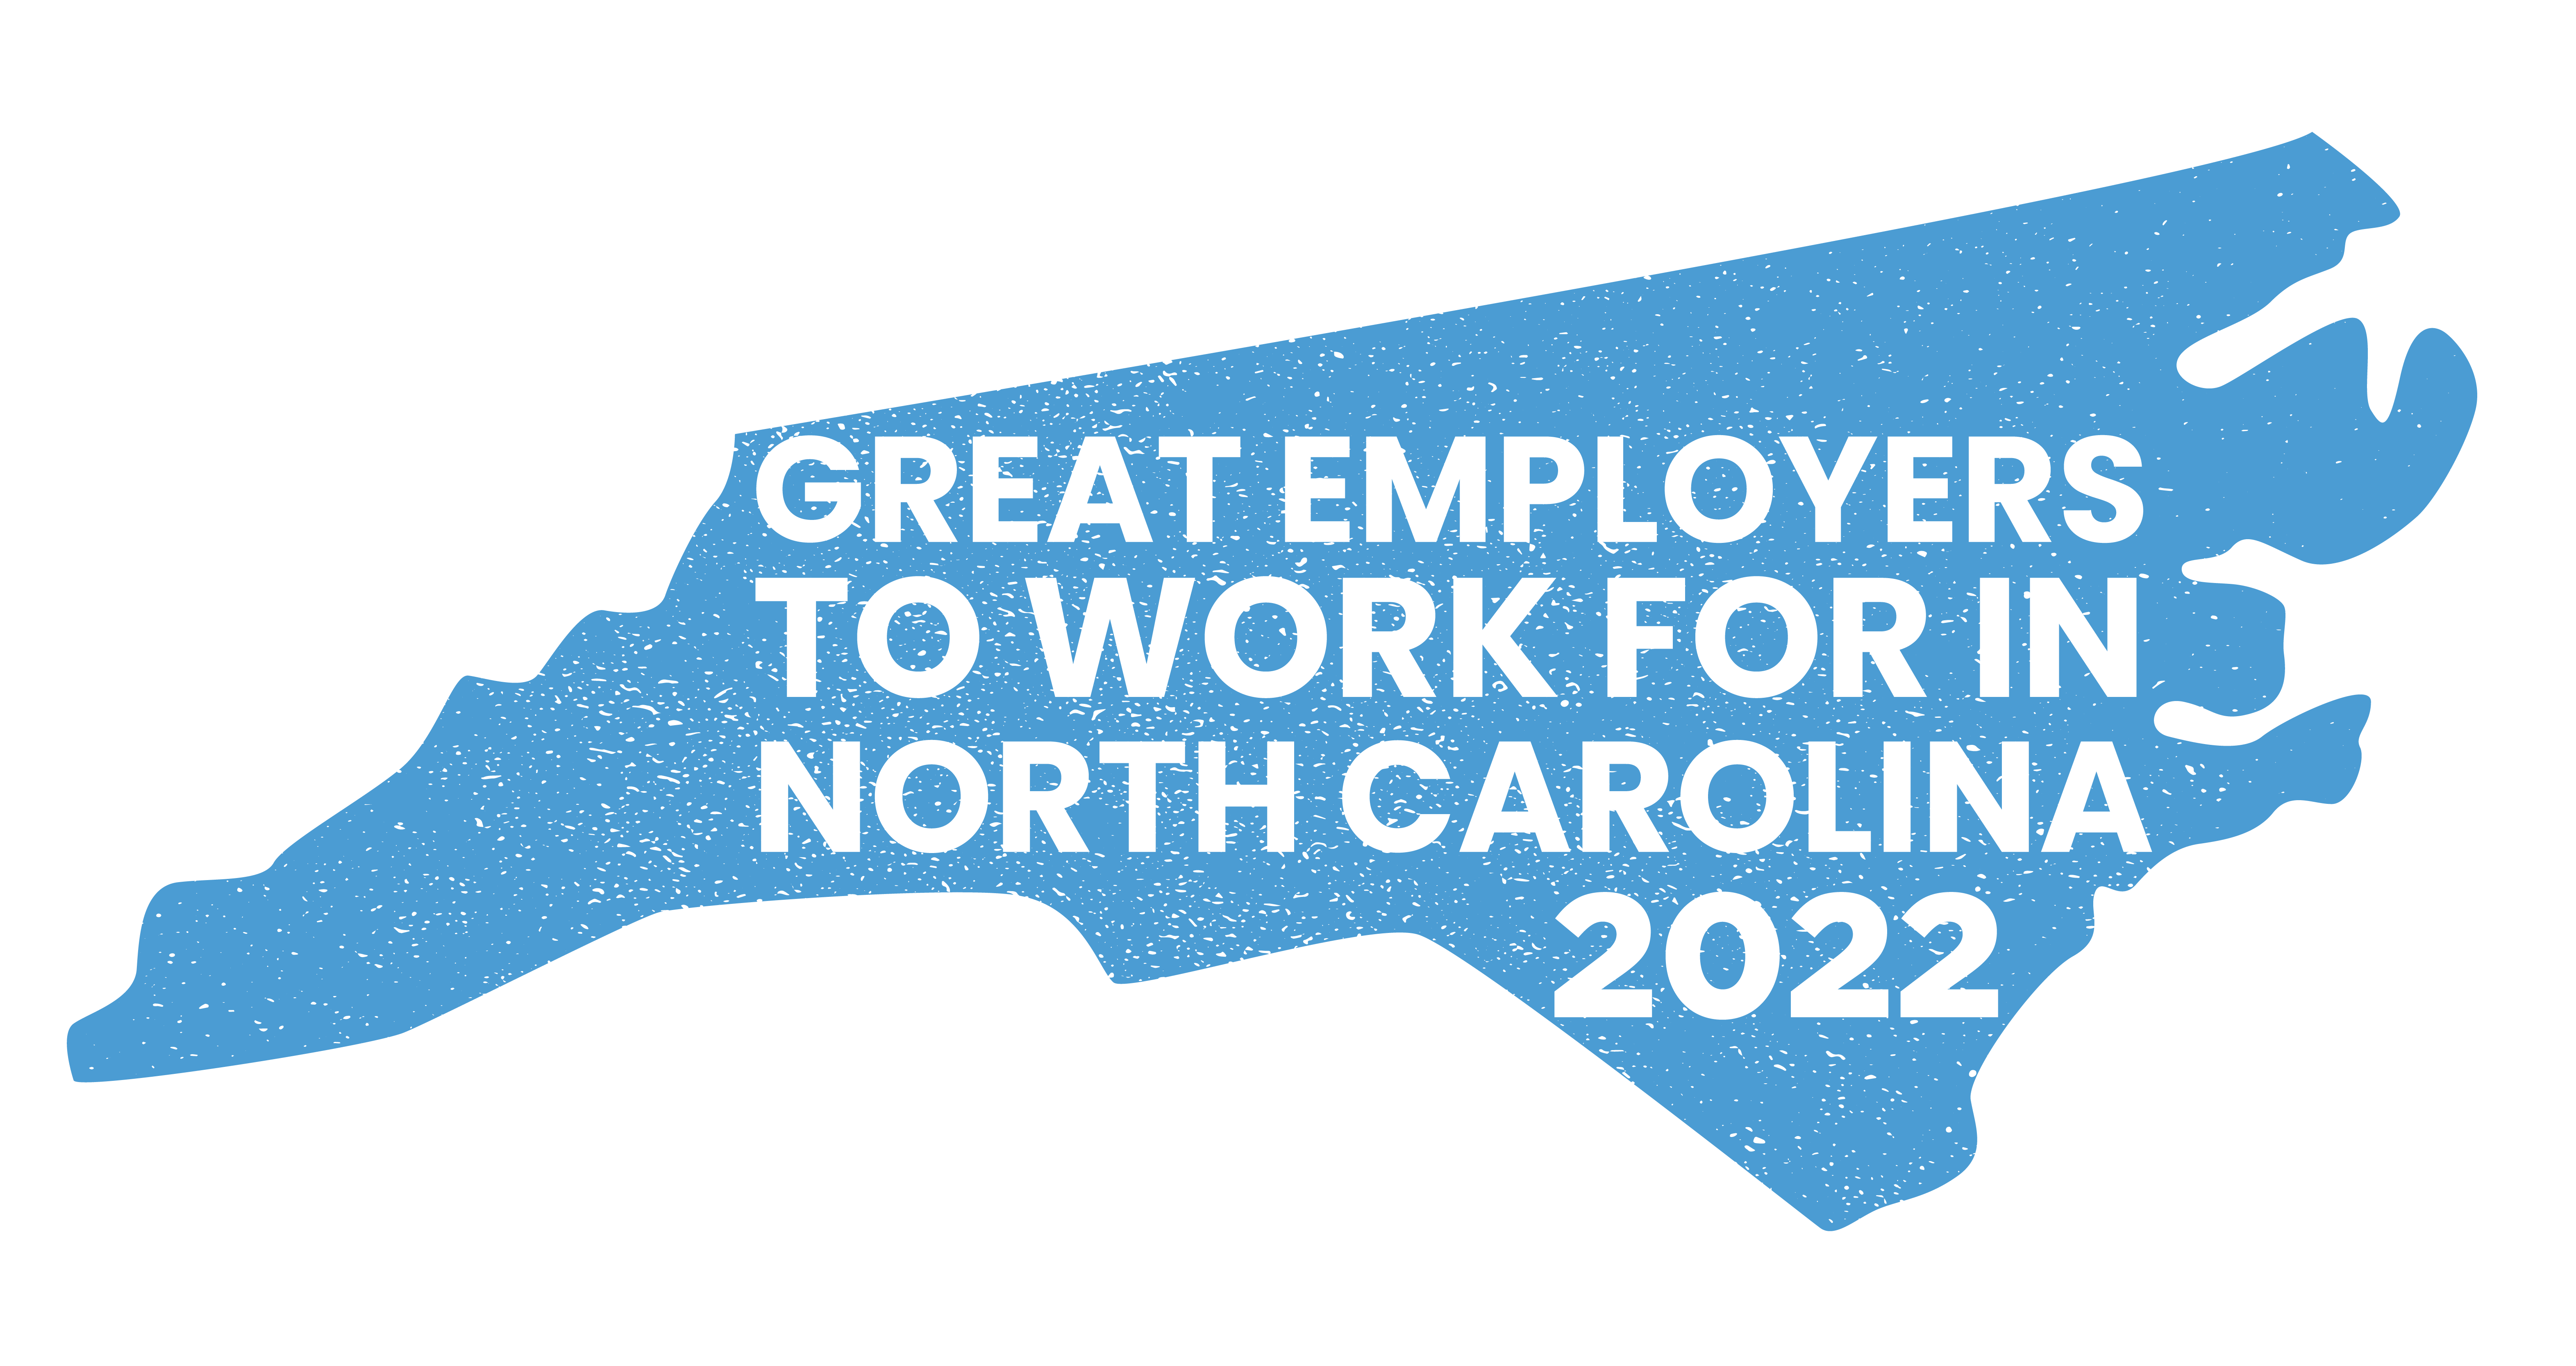 Blue image of North Carolina for the Great Employers to Work for in North Carolina 2022 logo.